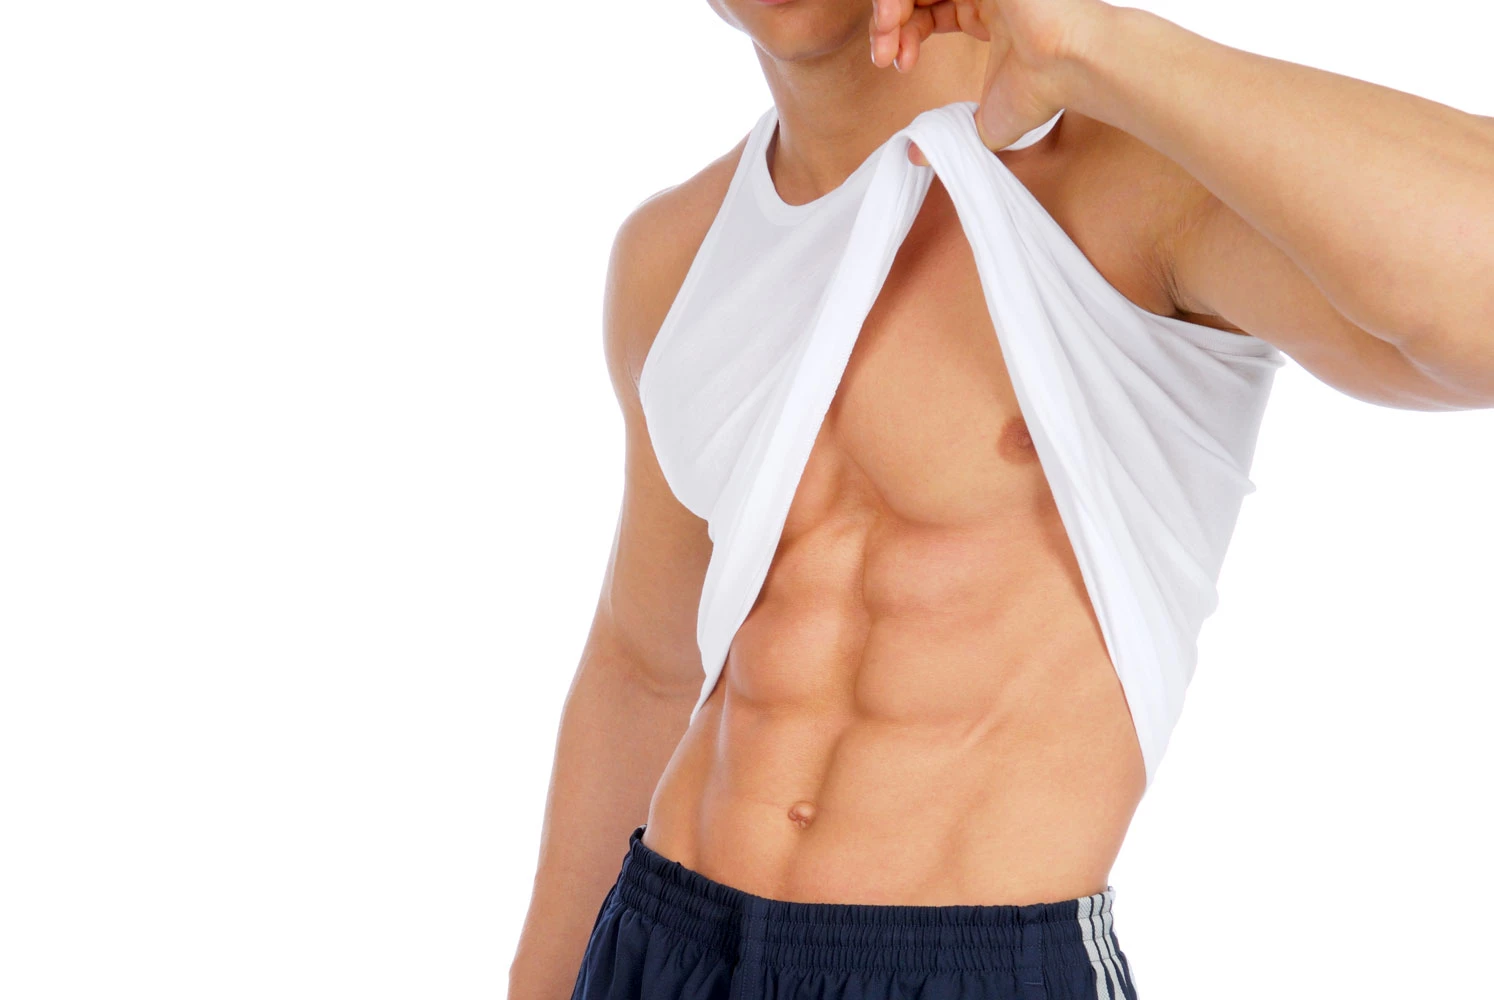 An In-Depth Look at the Six Pack Procedure for Men image